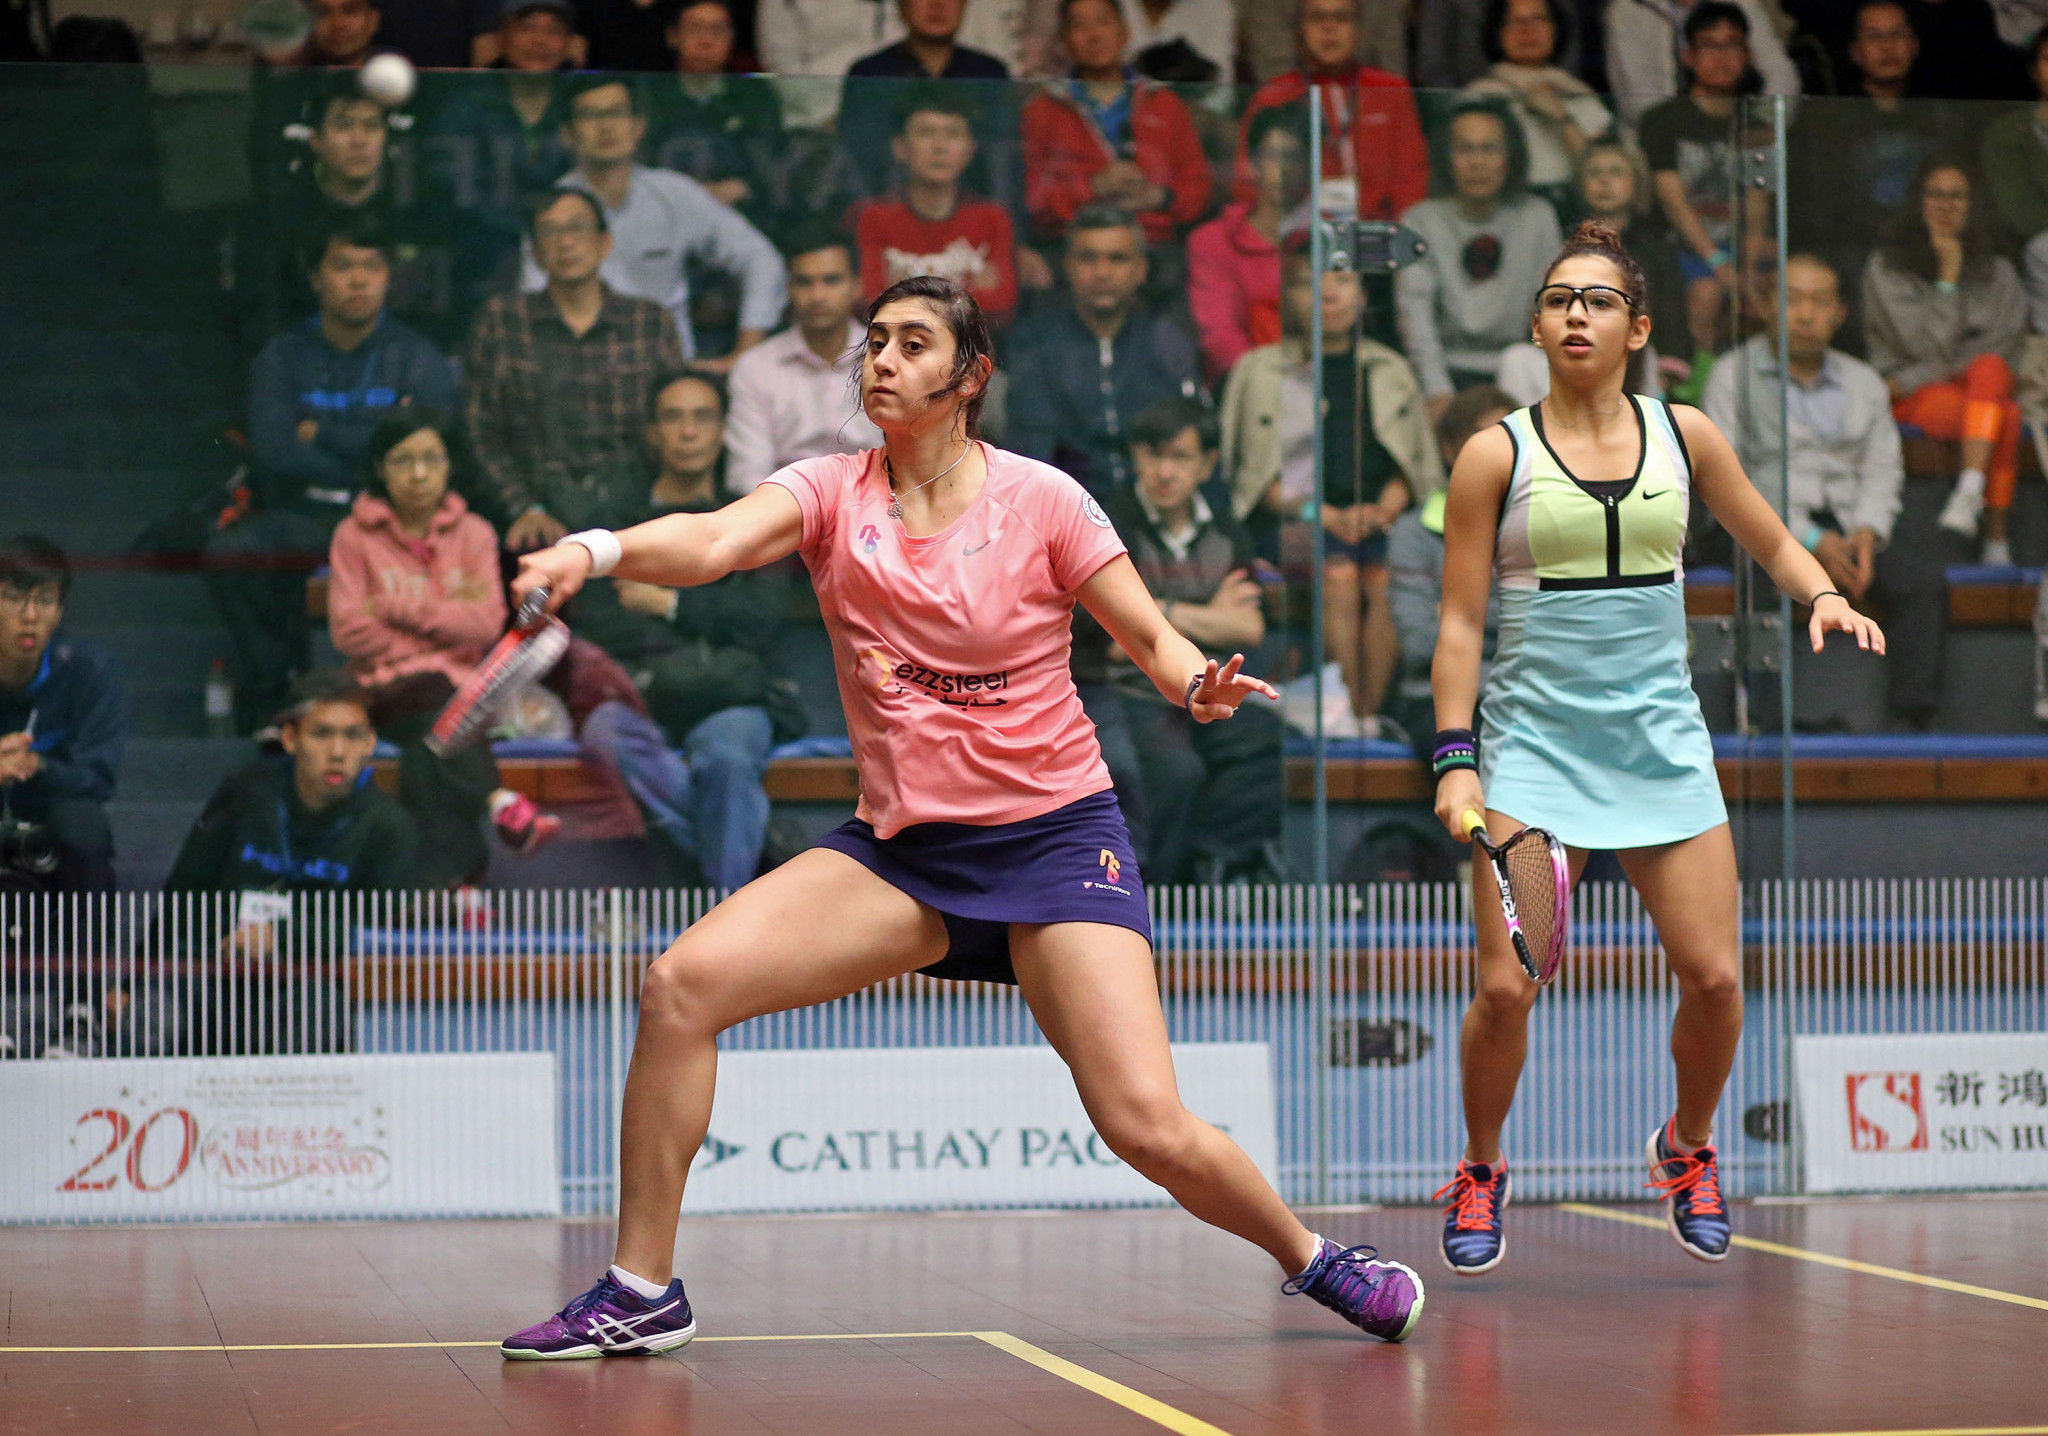 Women’s world number one Nour El Sherbini eased into the second round of the women's event ©PSA